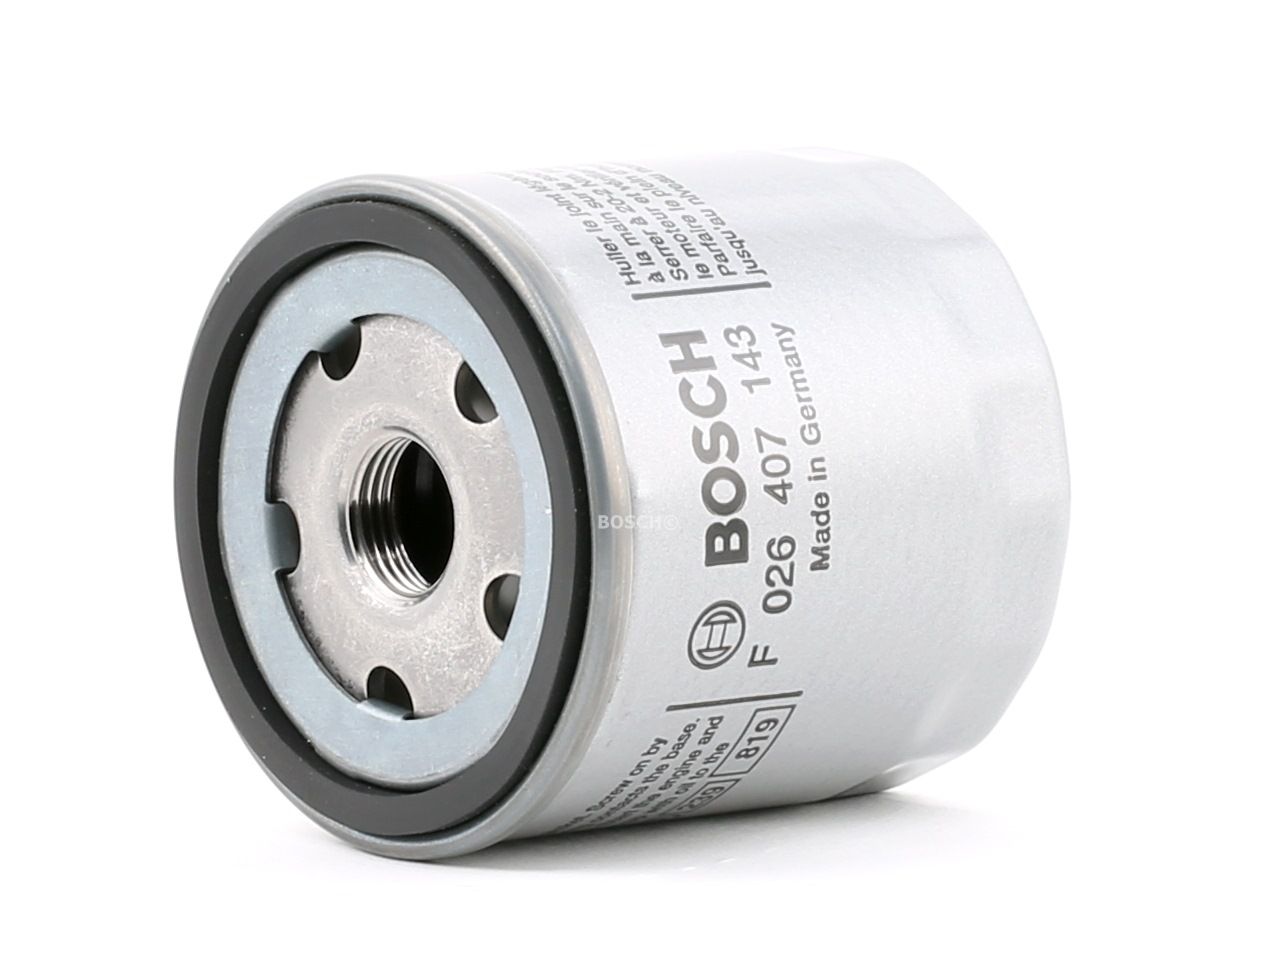 Audi Oil filter BOSCH P 7143 at a good price